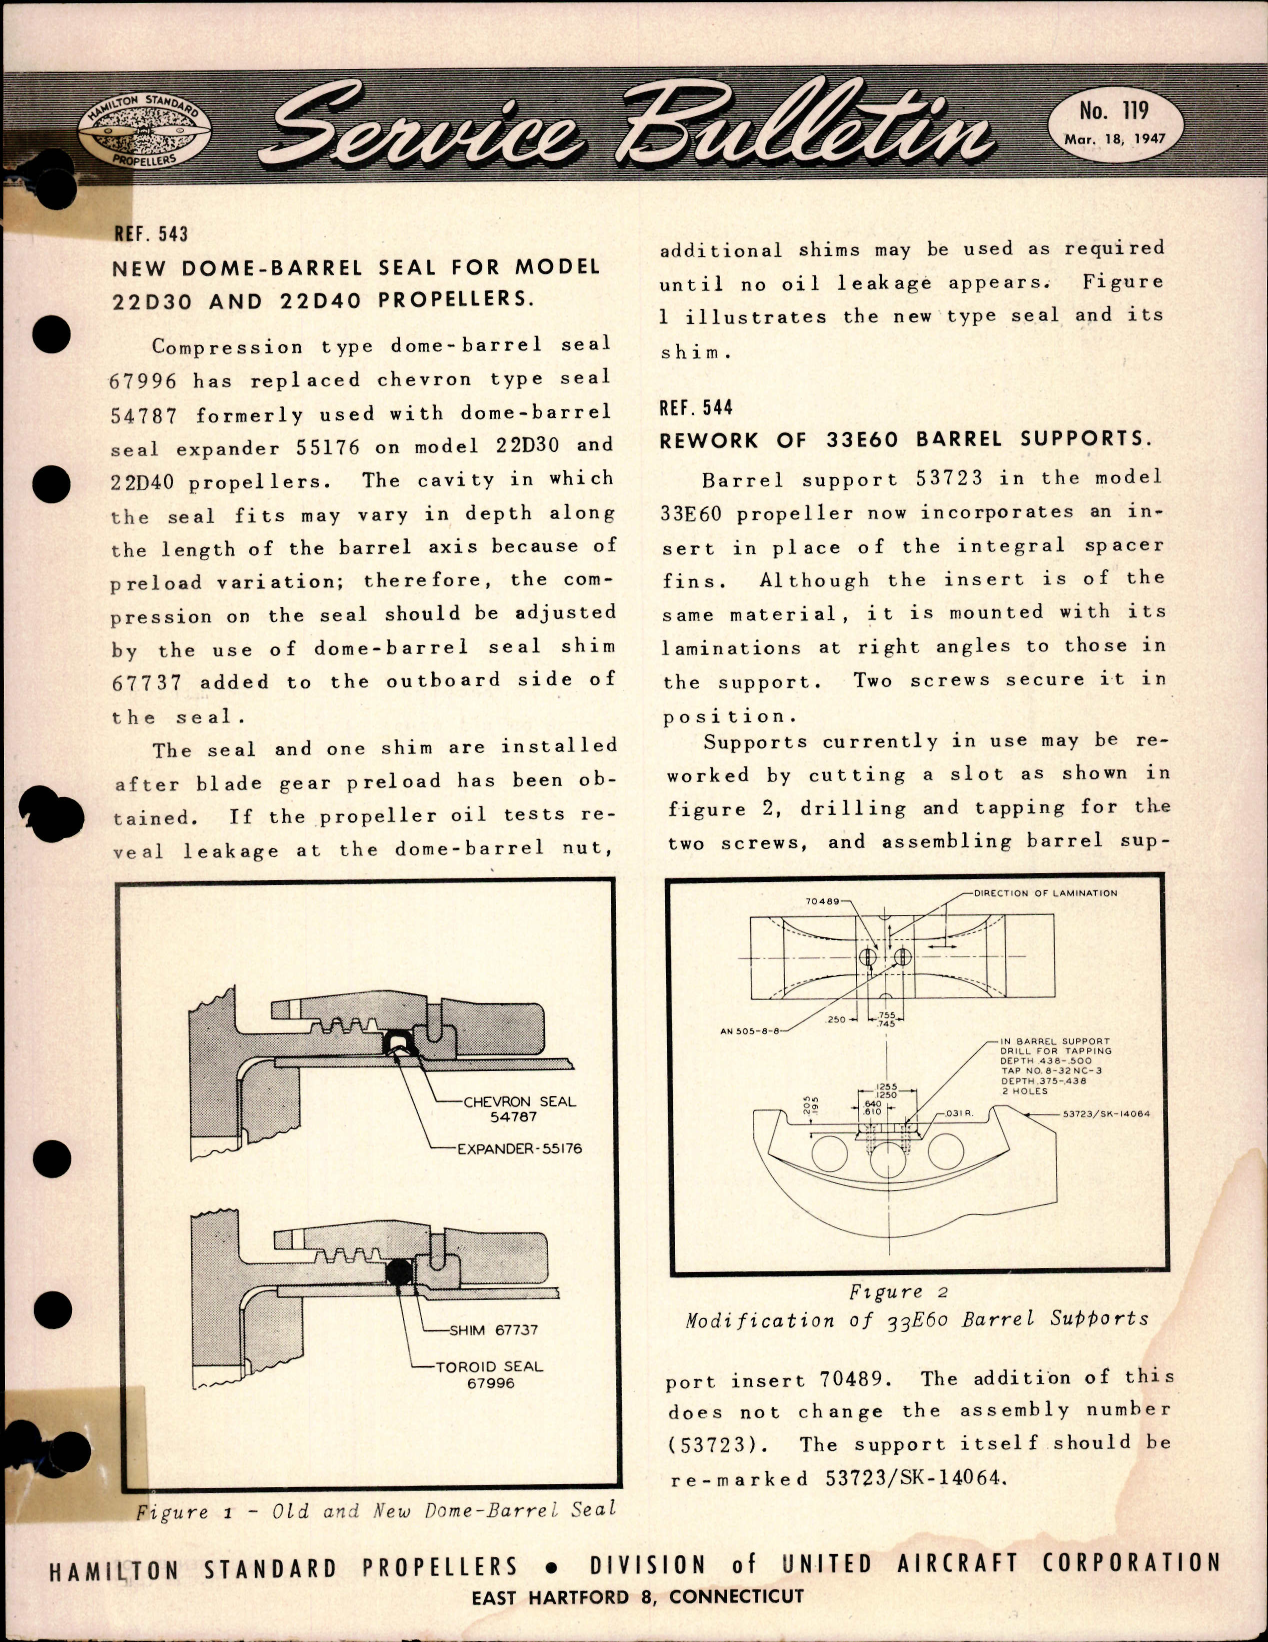 Sample page 1 from AirCorps Library document: New Dome-Barrel Seal for Model 22D30 and 22D40 Propellers, Ref 543